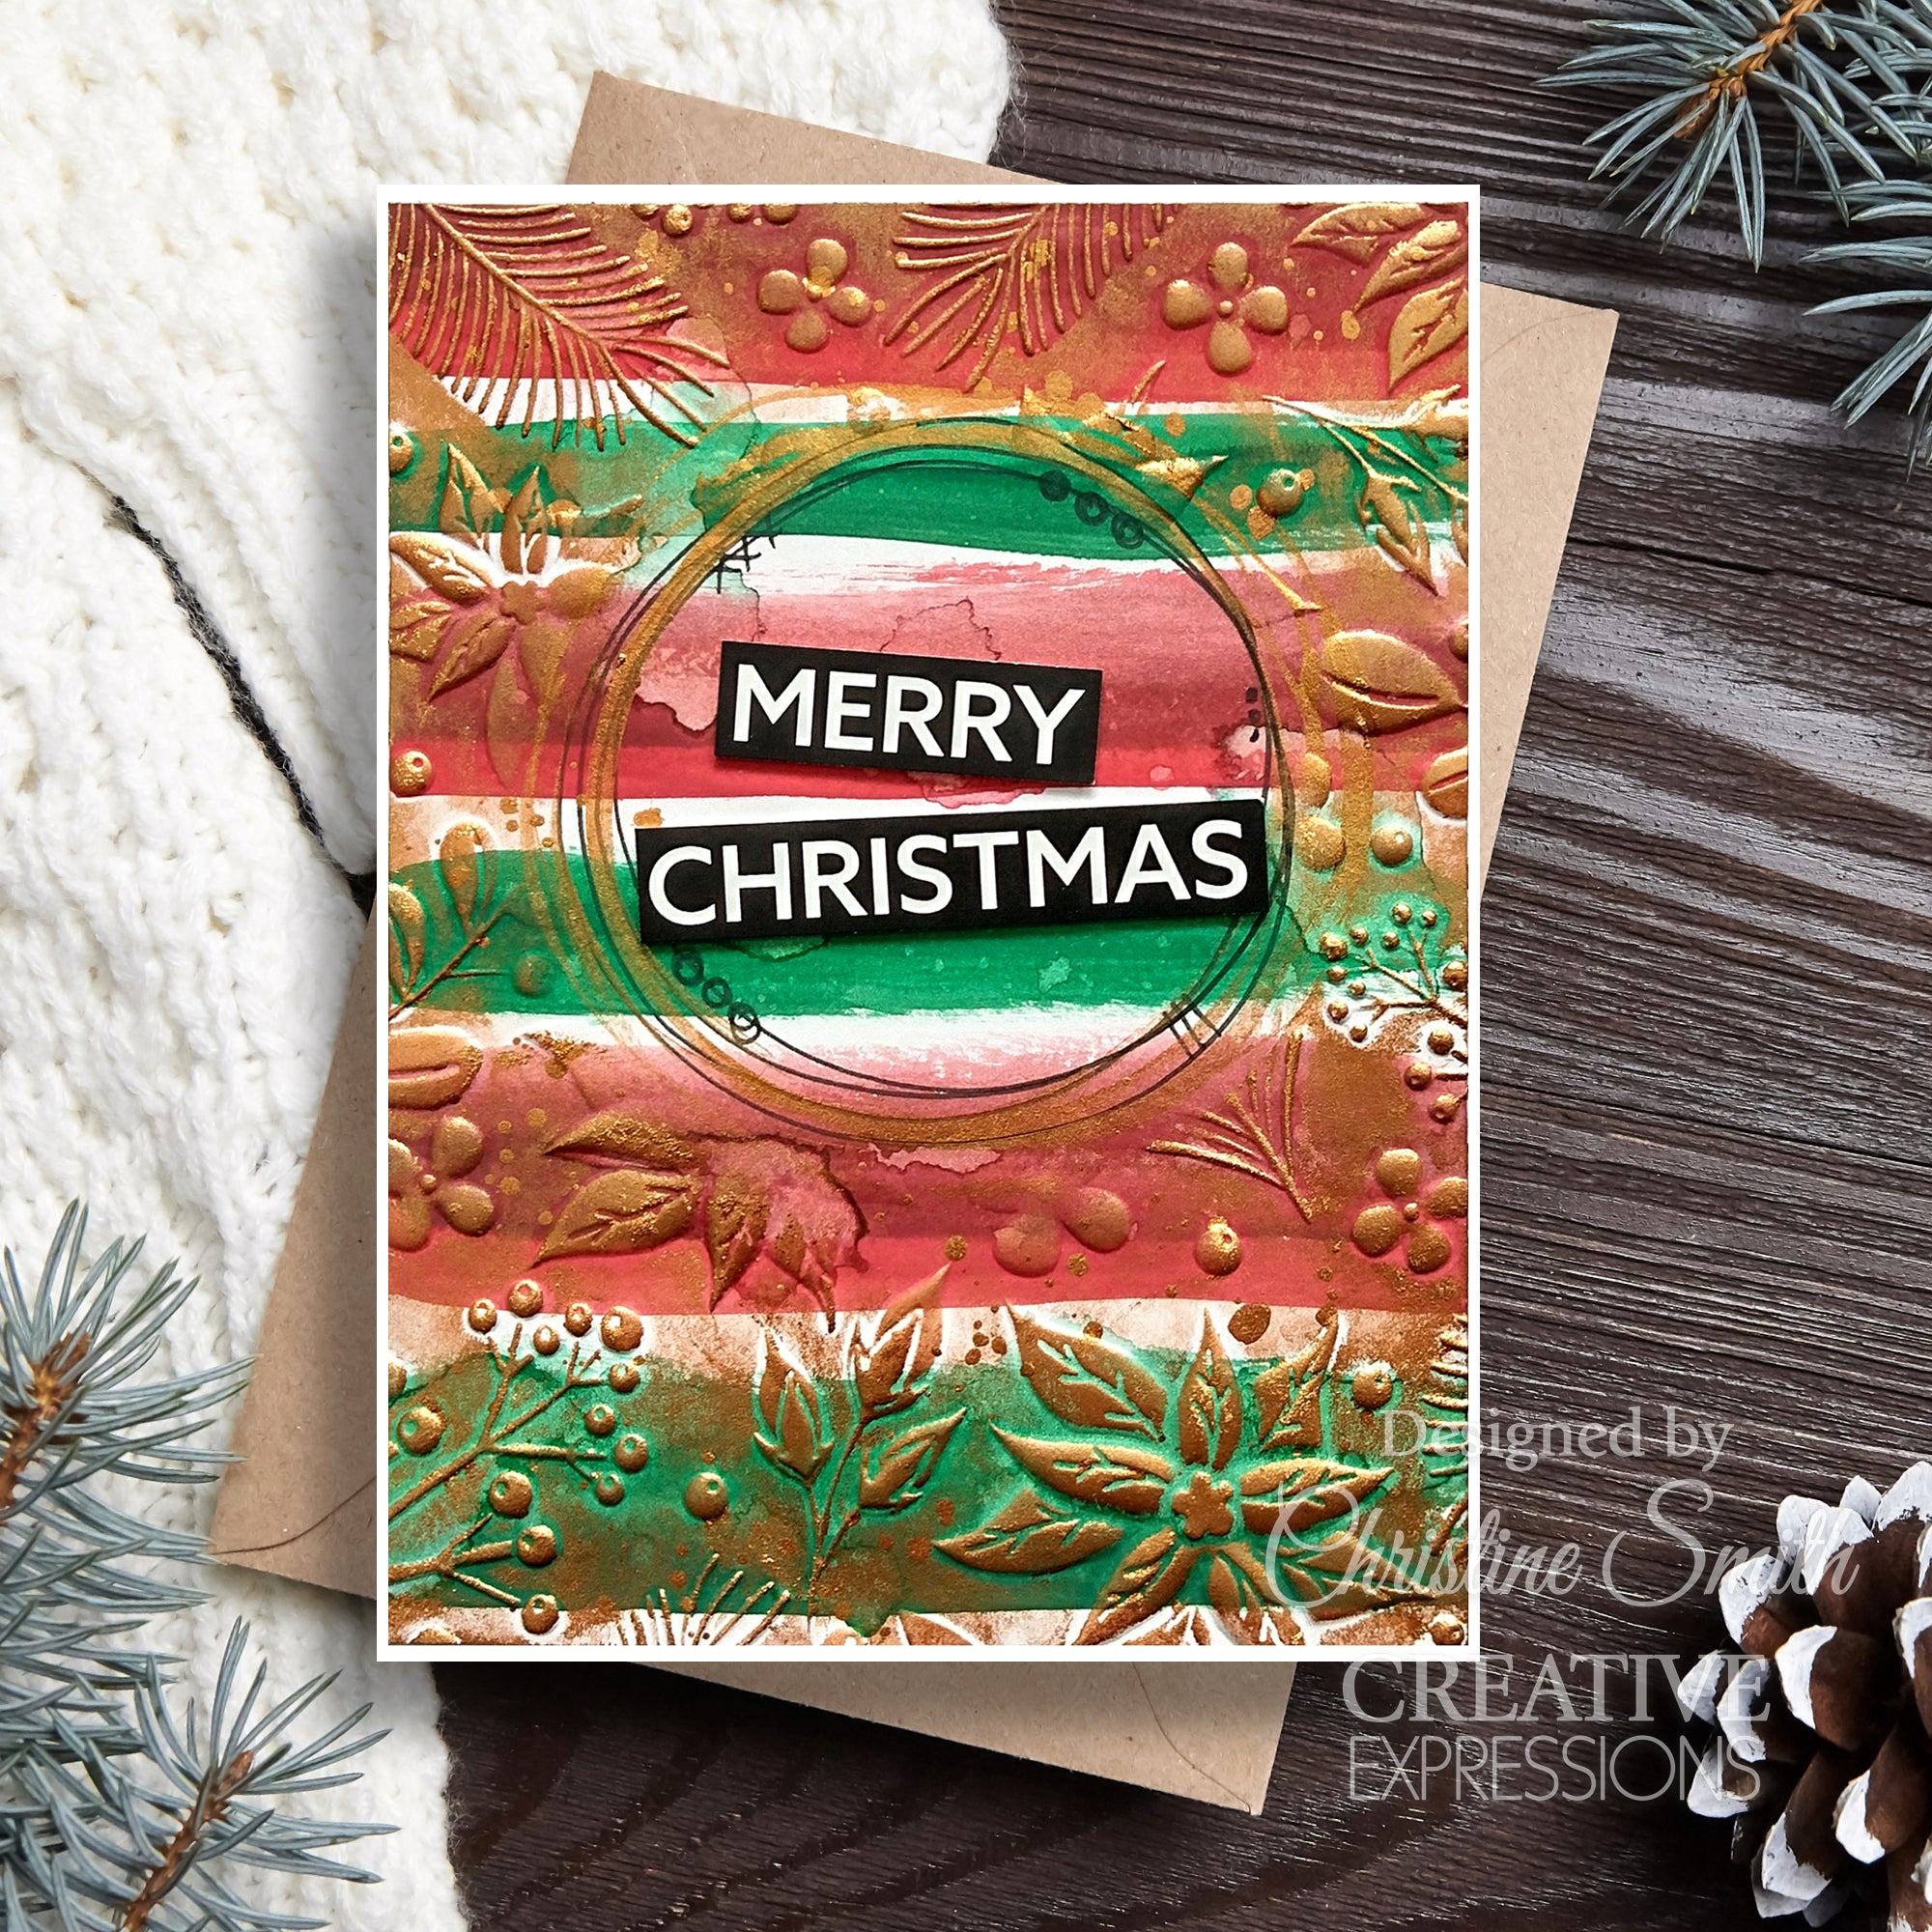 Creative Expressions Nature's Christmas 5 in x 7 in 3D Embossing Folder